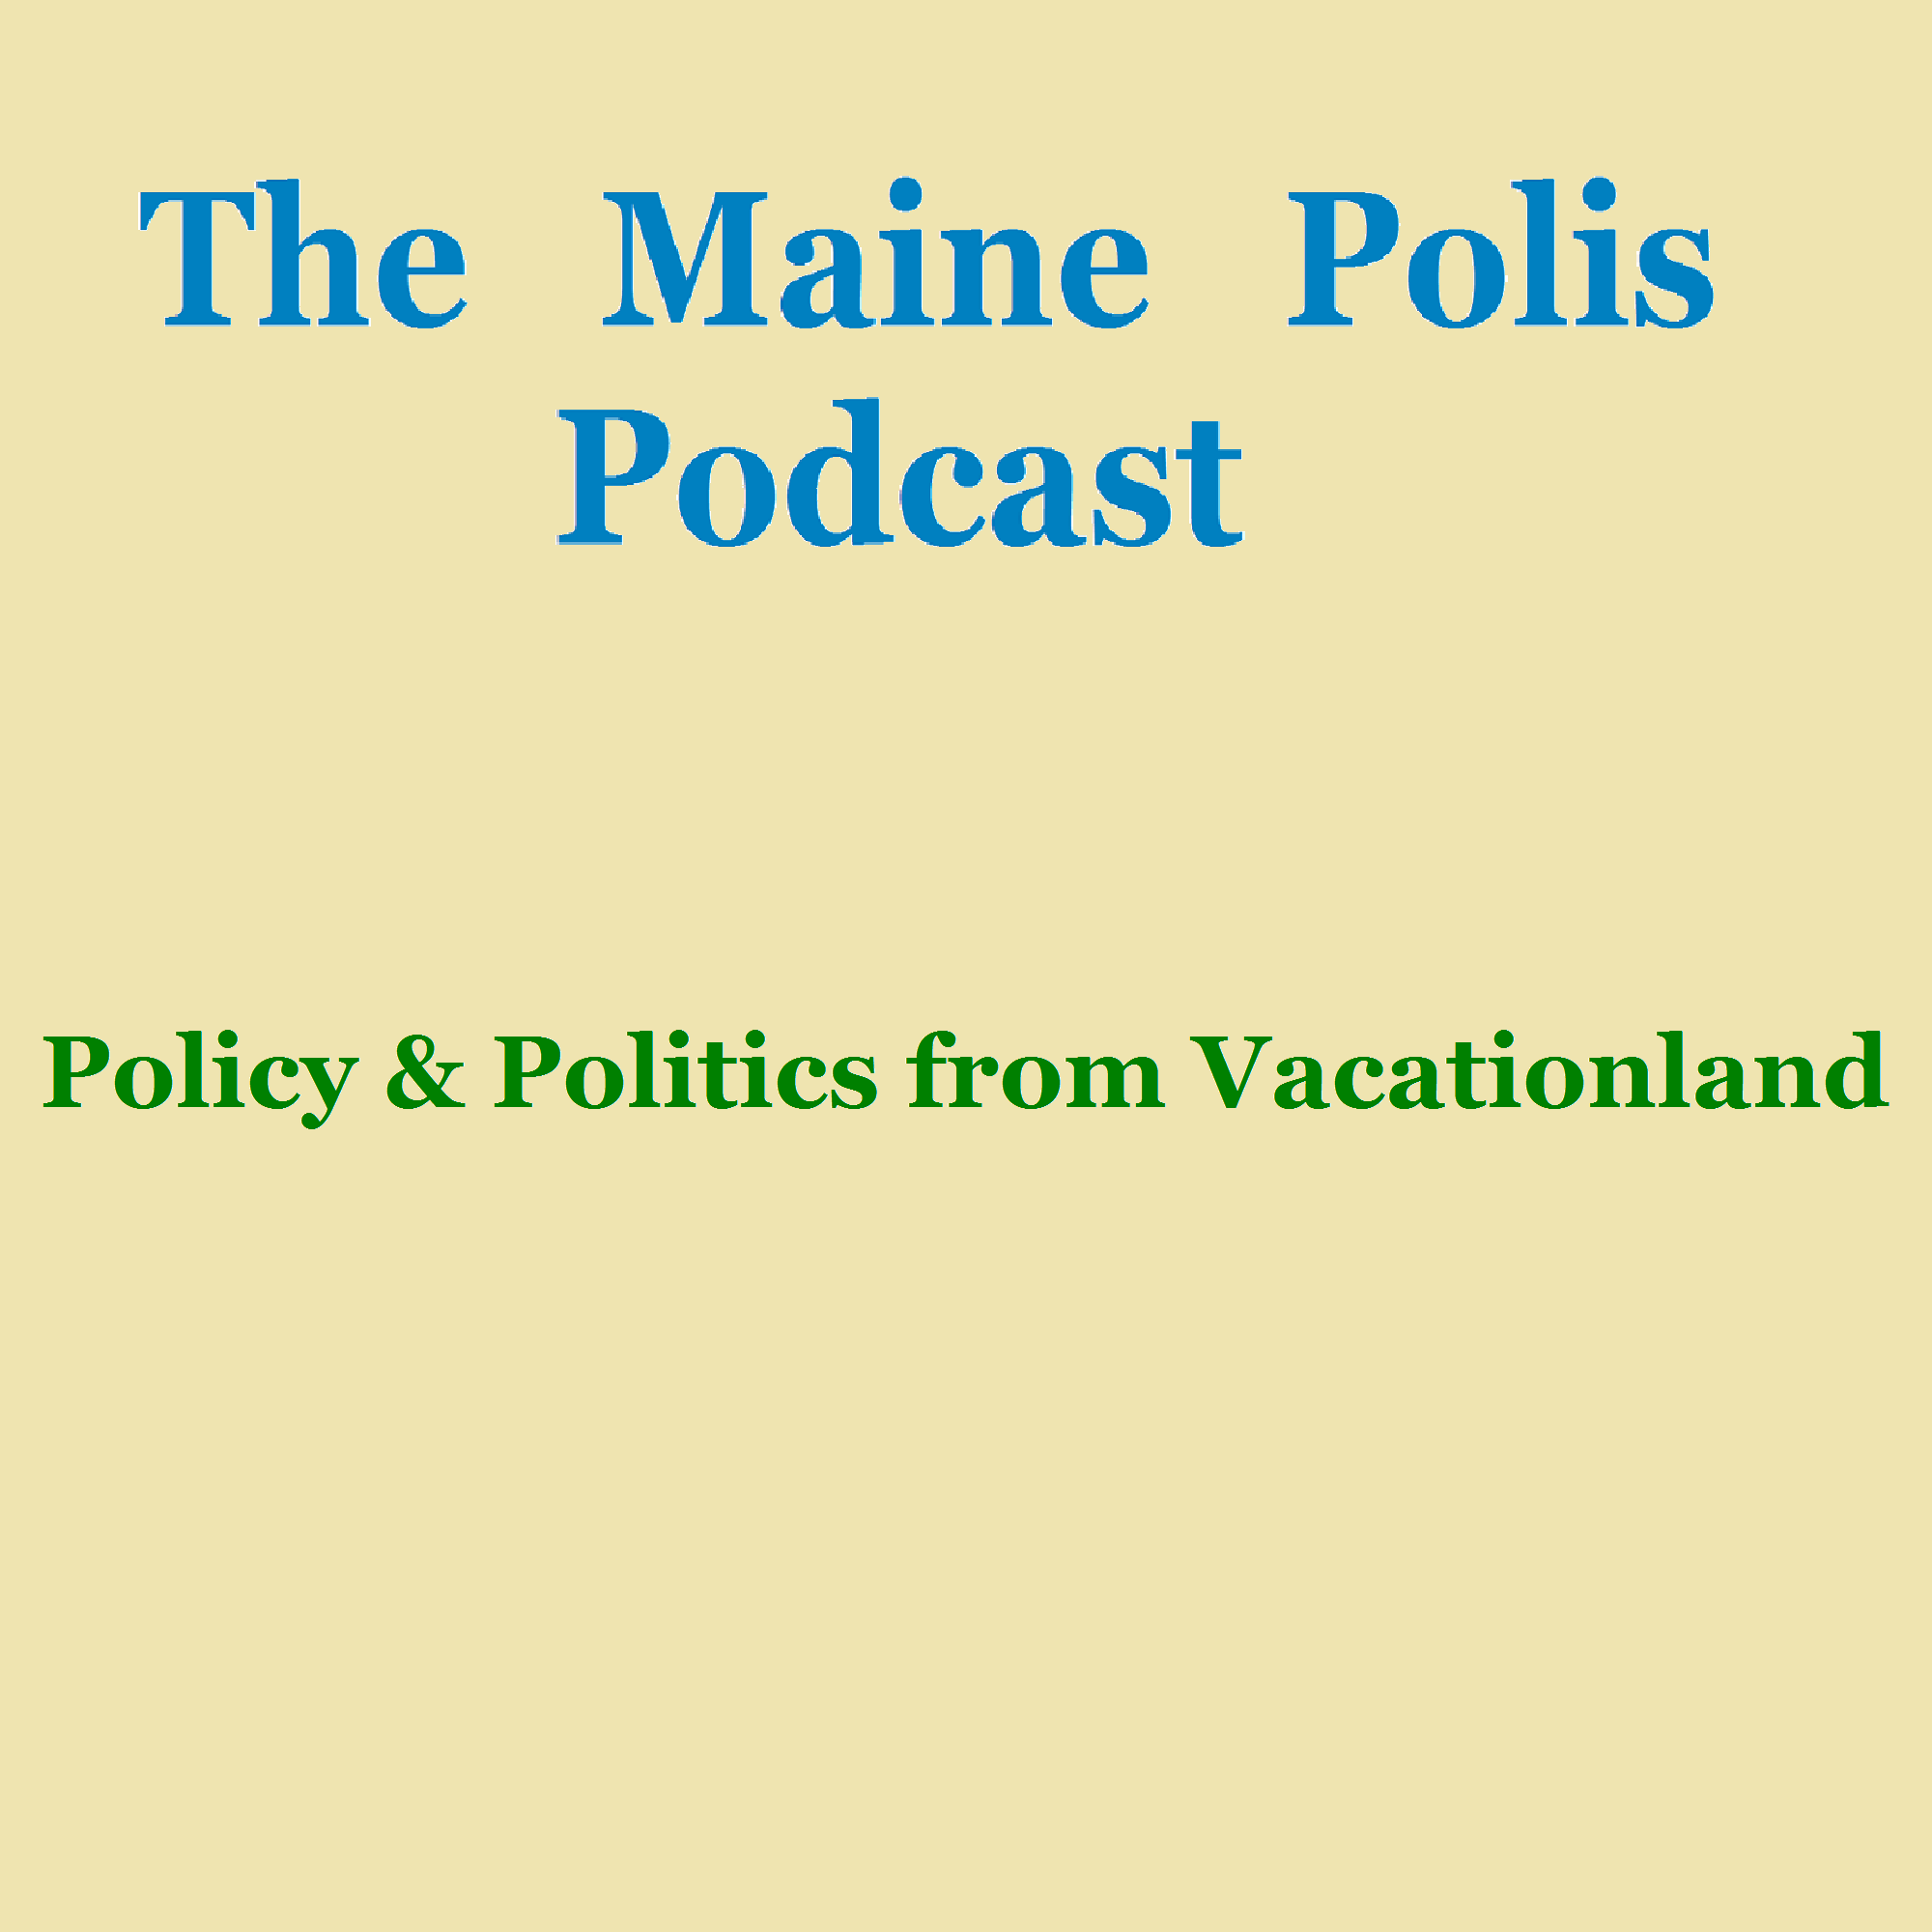 TMP Podcast #9 - Maine's Fireworks Policy Problems & A First Look at Bill to Prevent Election Audits